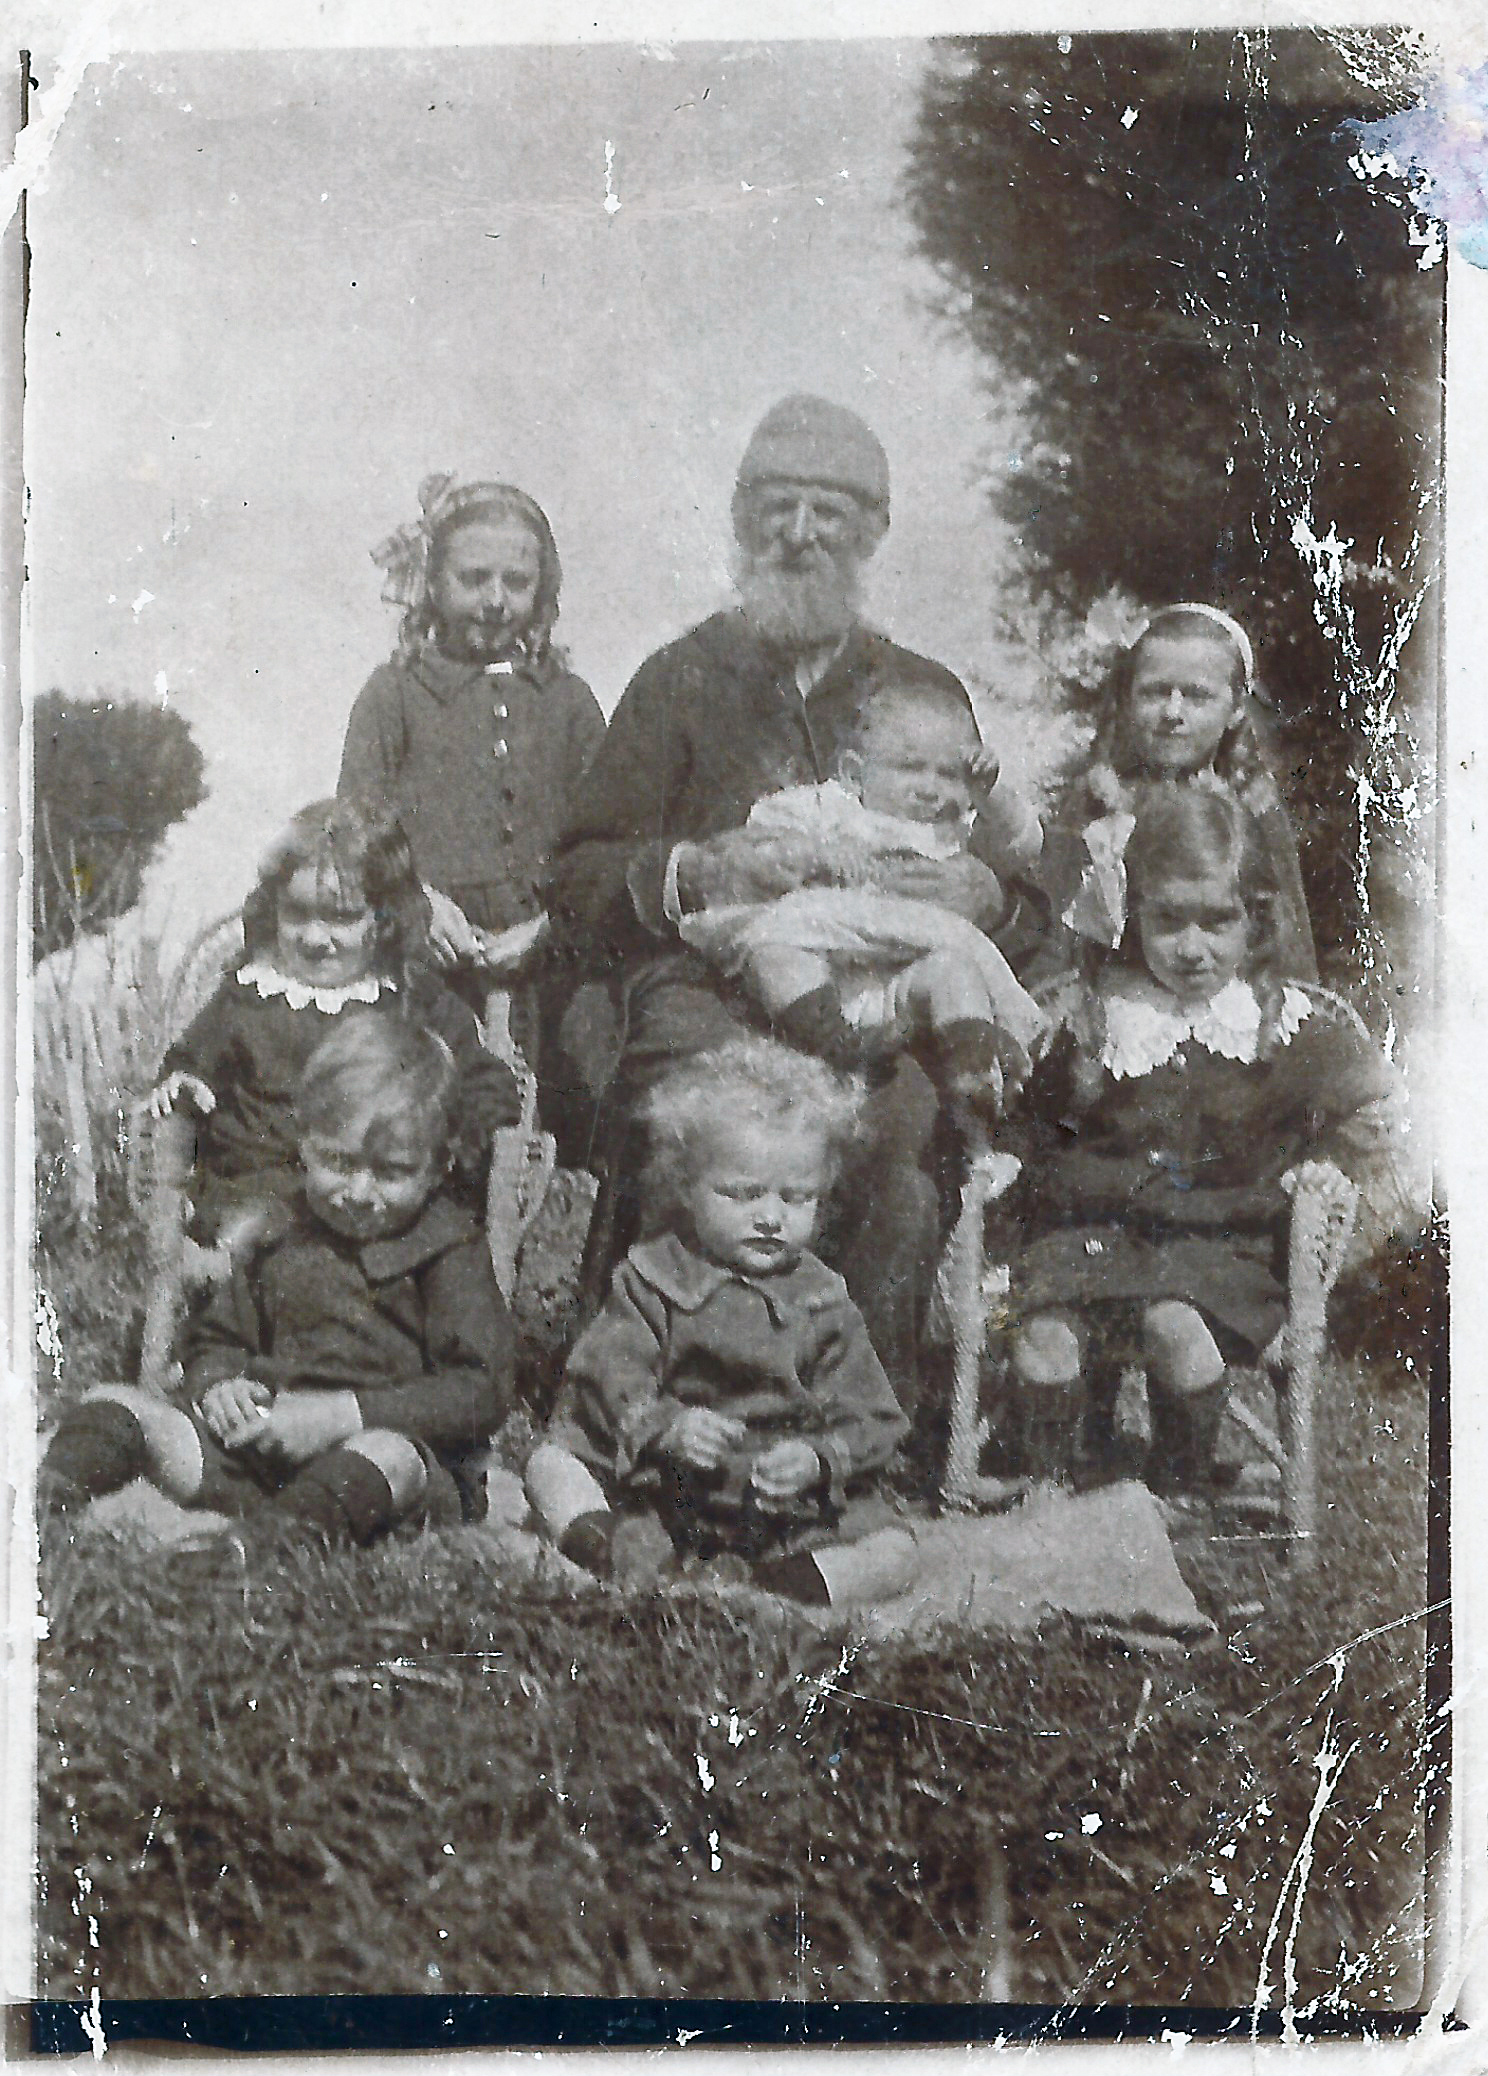 Edith, Jack holding Benjamin George, Jean, Olive, Evelyn, Harry Evans and is it Eva after Aug 1917 Mervyn Lawn